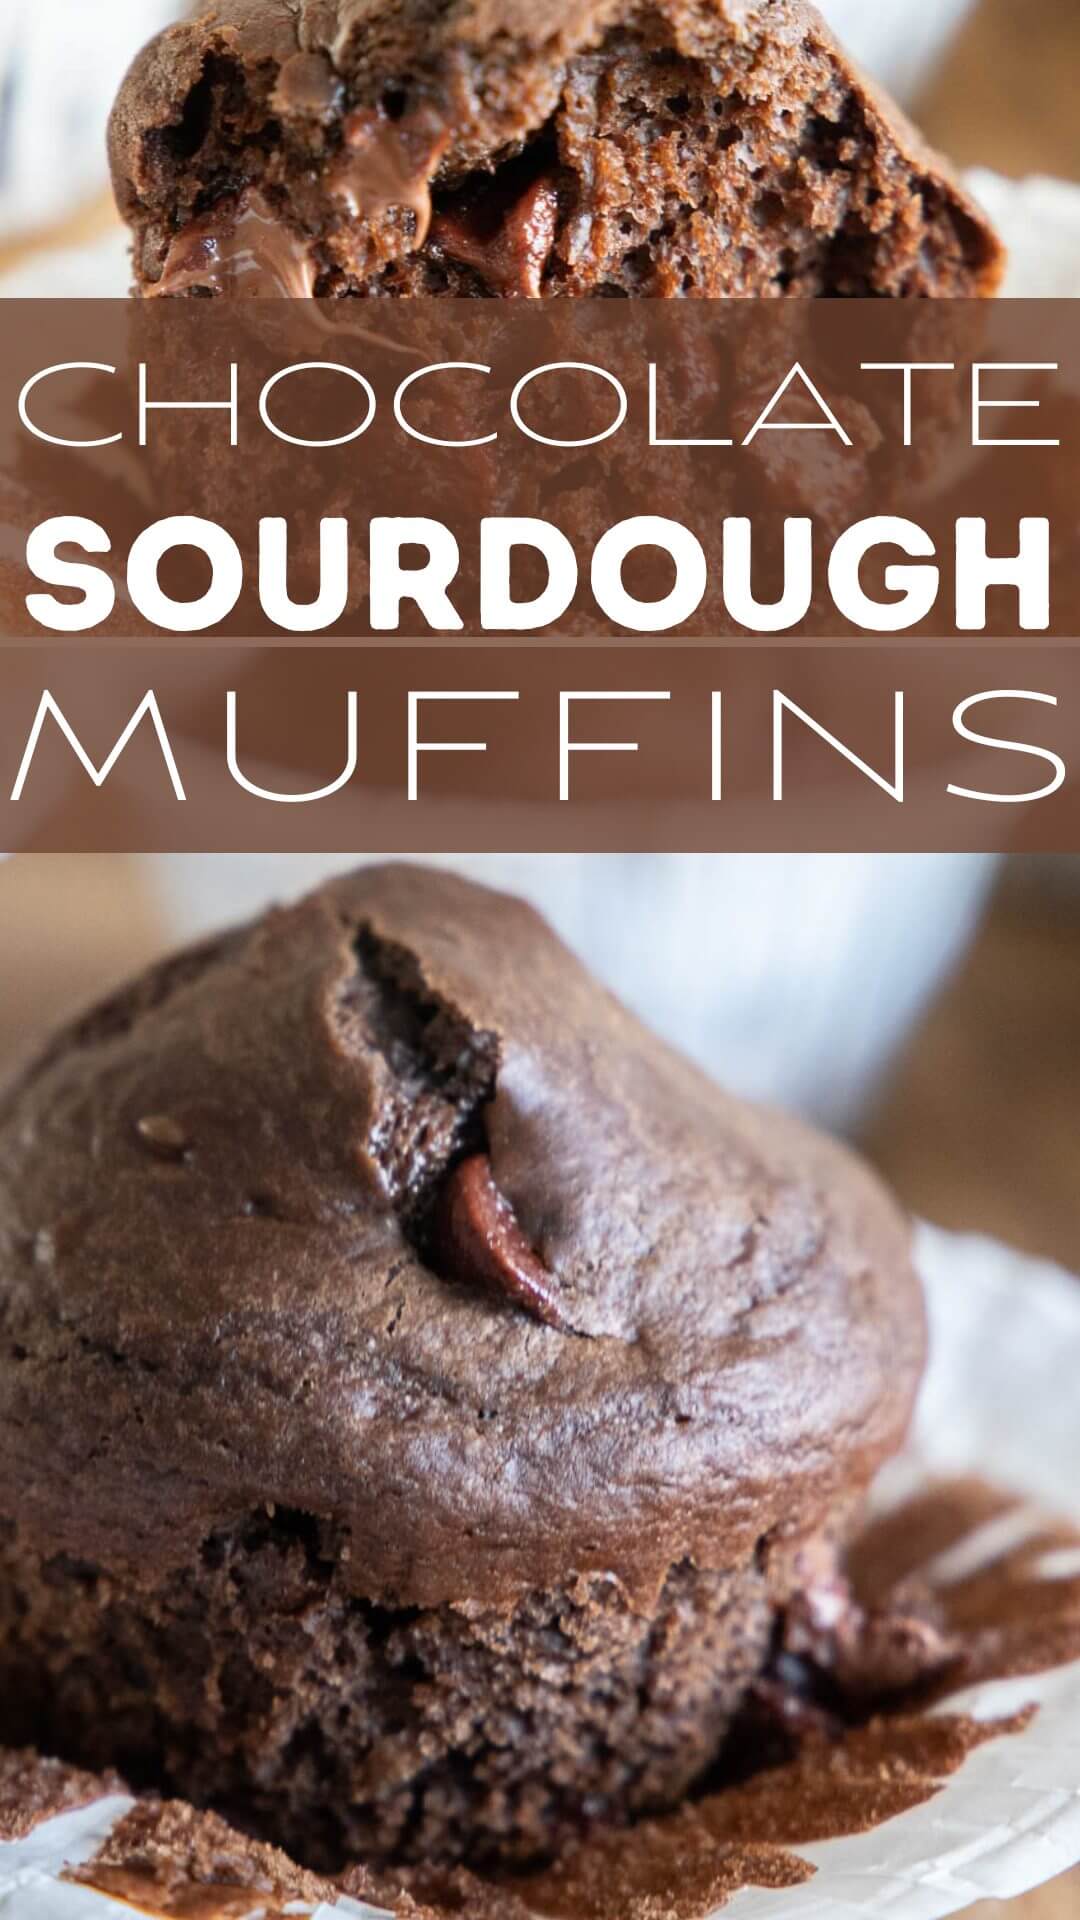 Make these easy sourdough discard chocolate muffins with chocolate chips! These are soft and tender with an amazing chocolate flavor! The hint of sourdough makes these even better! Use that sourdough discard on something delicious!